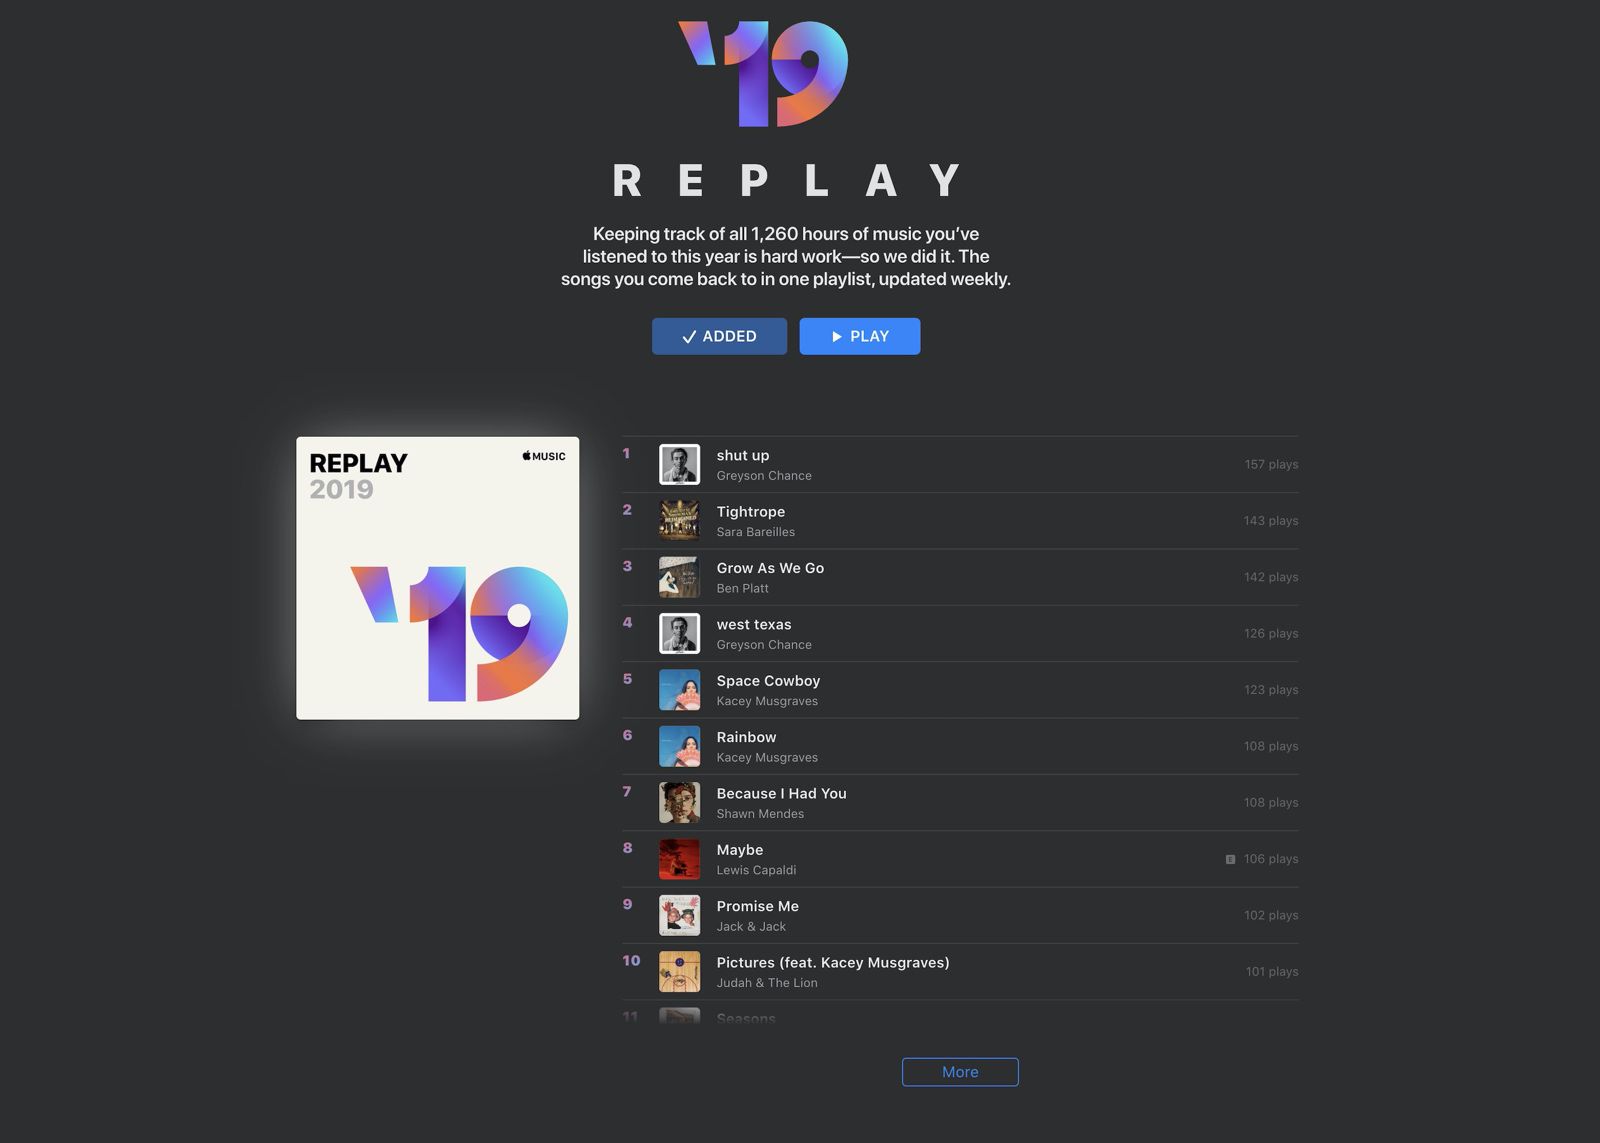 Apple Music Gains New 'Replay' Playlist With Your Top Songs Played in